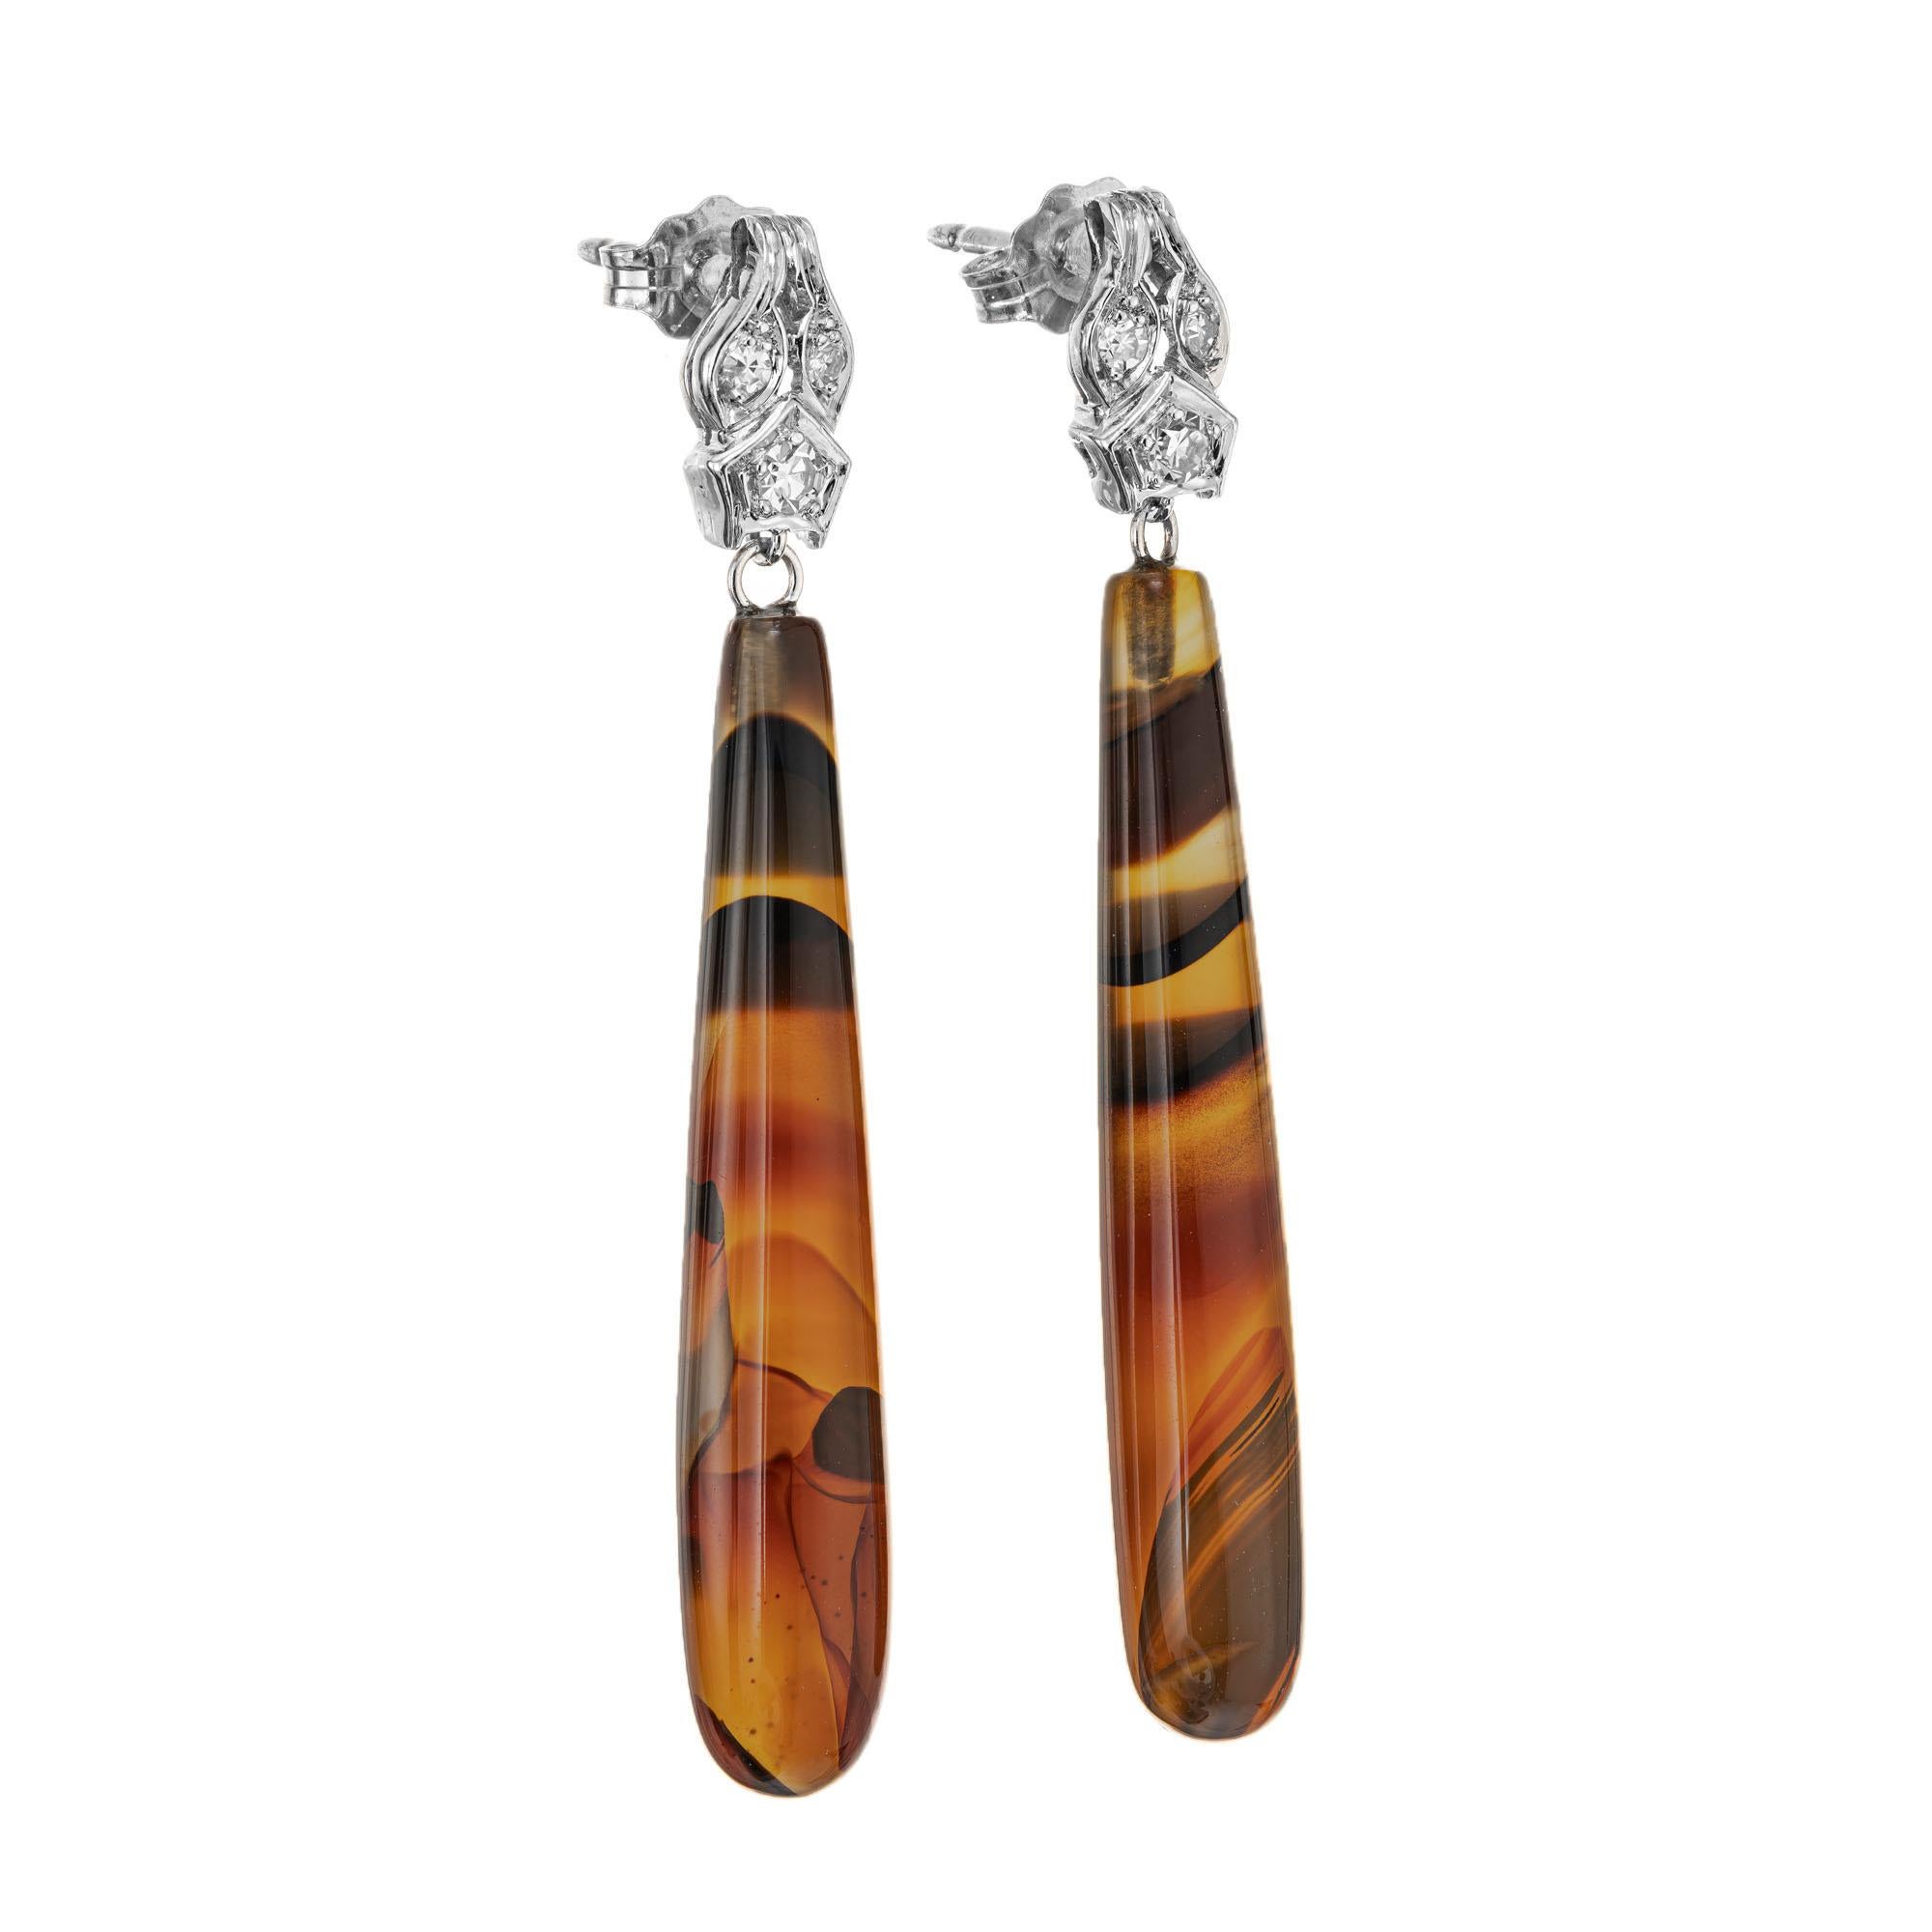 Vintage 1940's banded agate simple dangle earrings with 6 bead set diamonds in platinum tops. 

2 pear shaped black brown cabochon banded agate cylinders, approx. 11.62cts
6 single cut diamonds, G VS approx. .8cts
Platinum 
Stamped: PT950
4.6